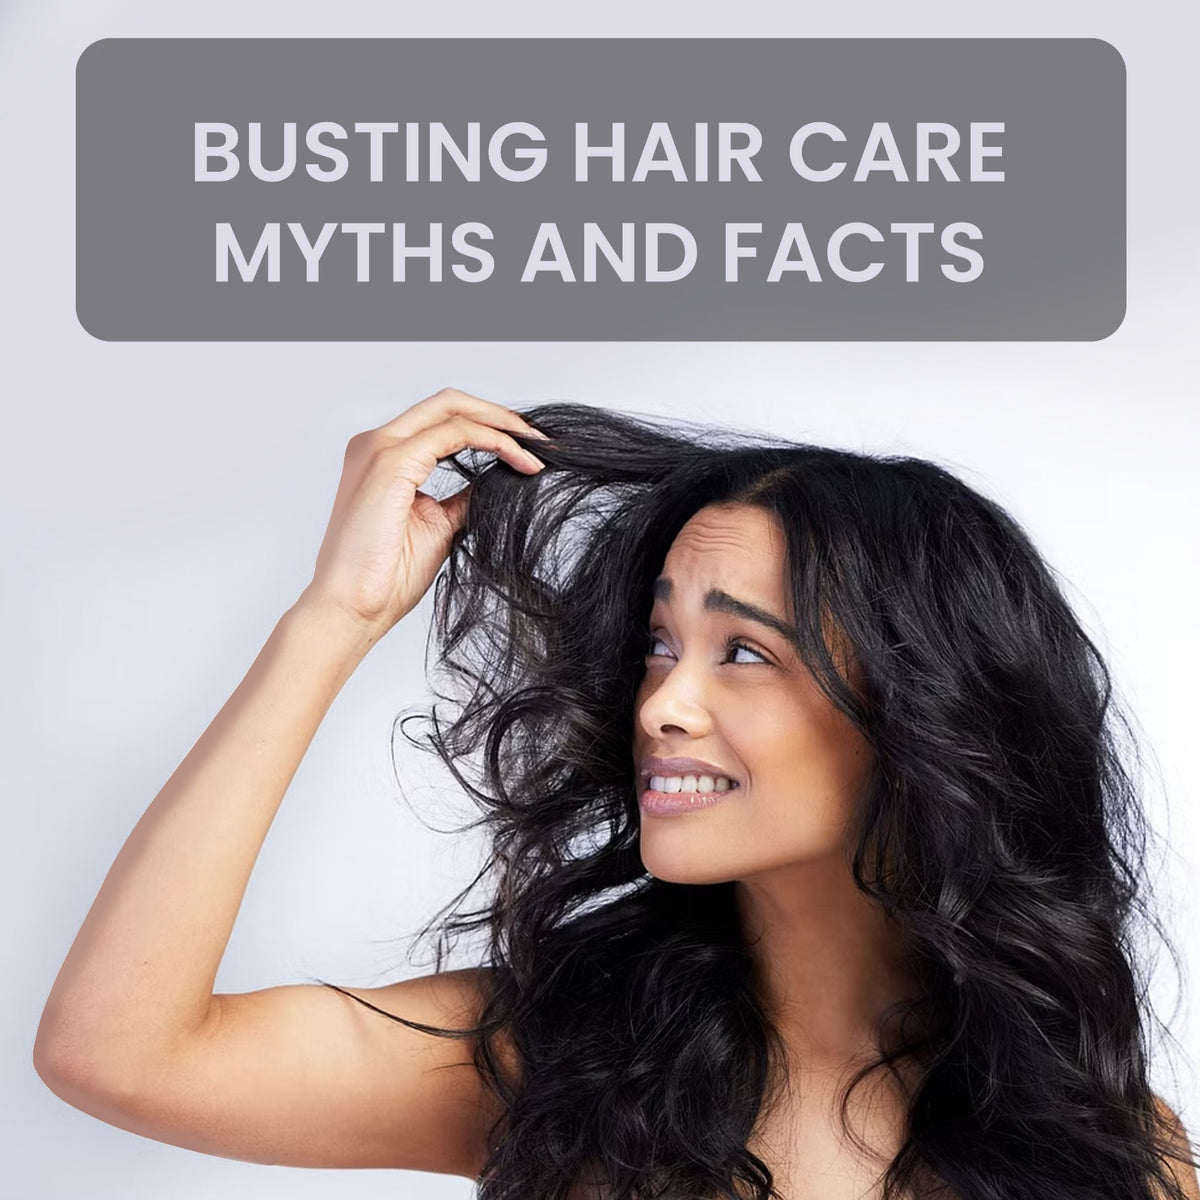 Busting Hair Care Myths and Facts